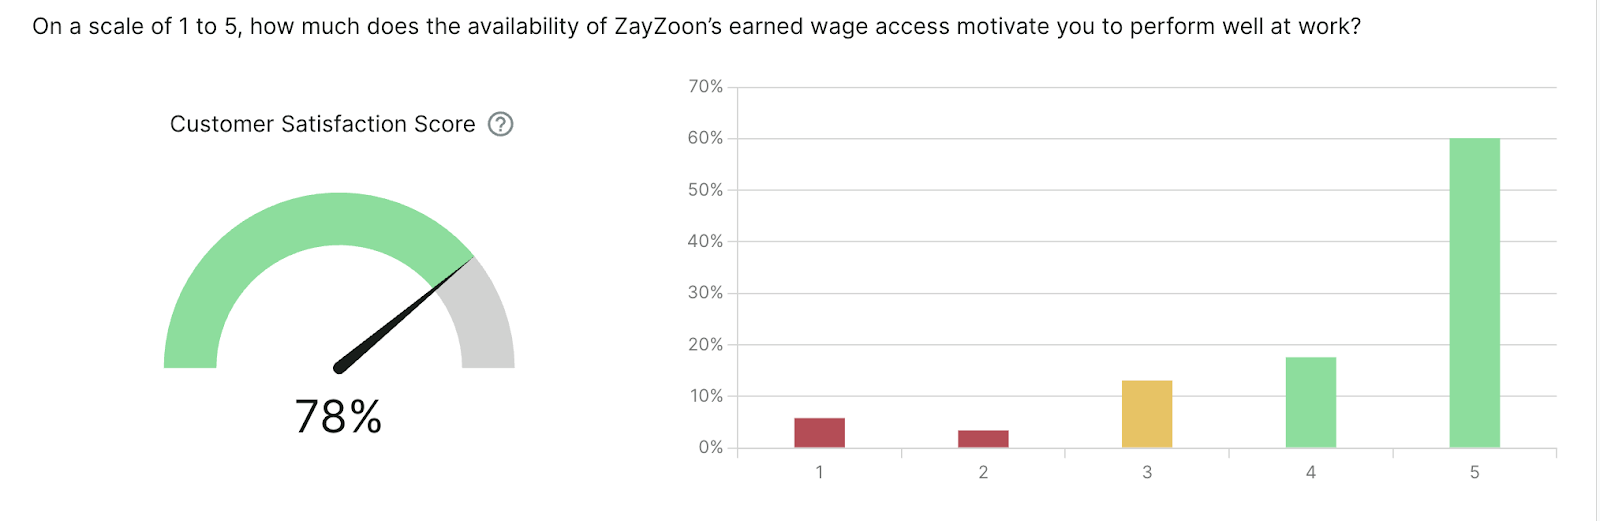 Graph showing that 78% of employees answered 4 or 5 when asked how much does the availability of ZayZoon’s earned wage access motivate you to perform well at work?”